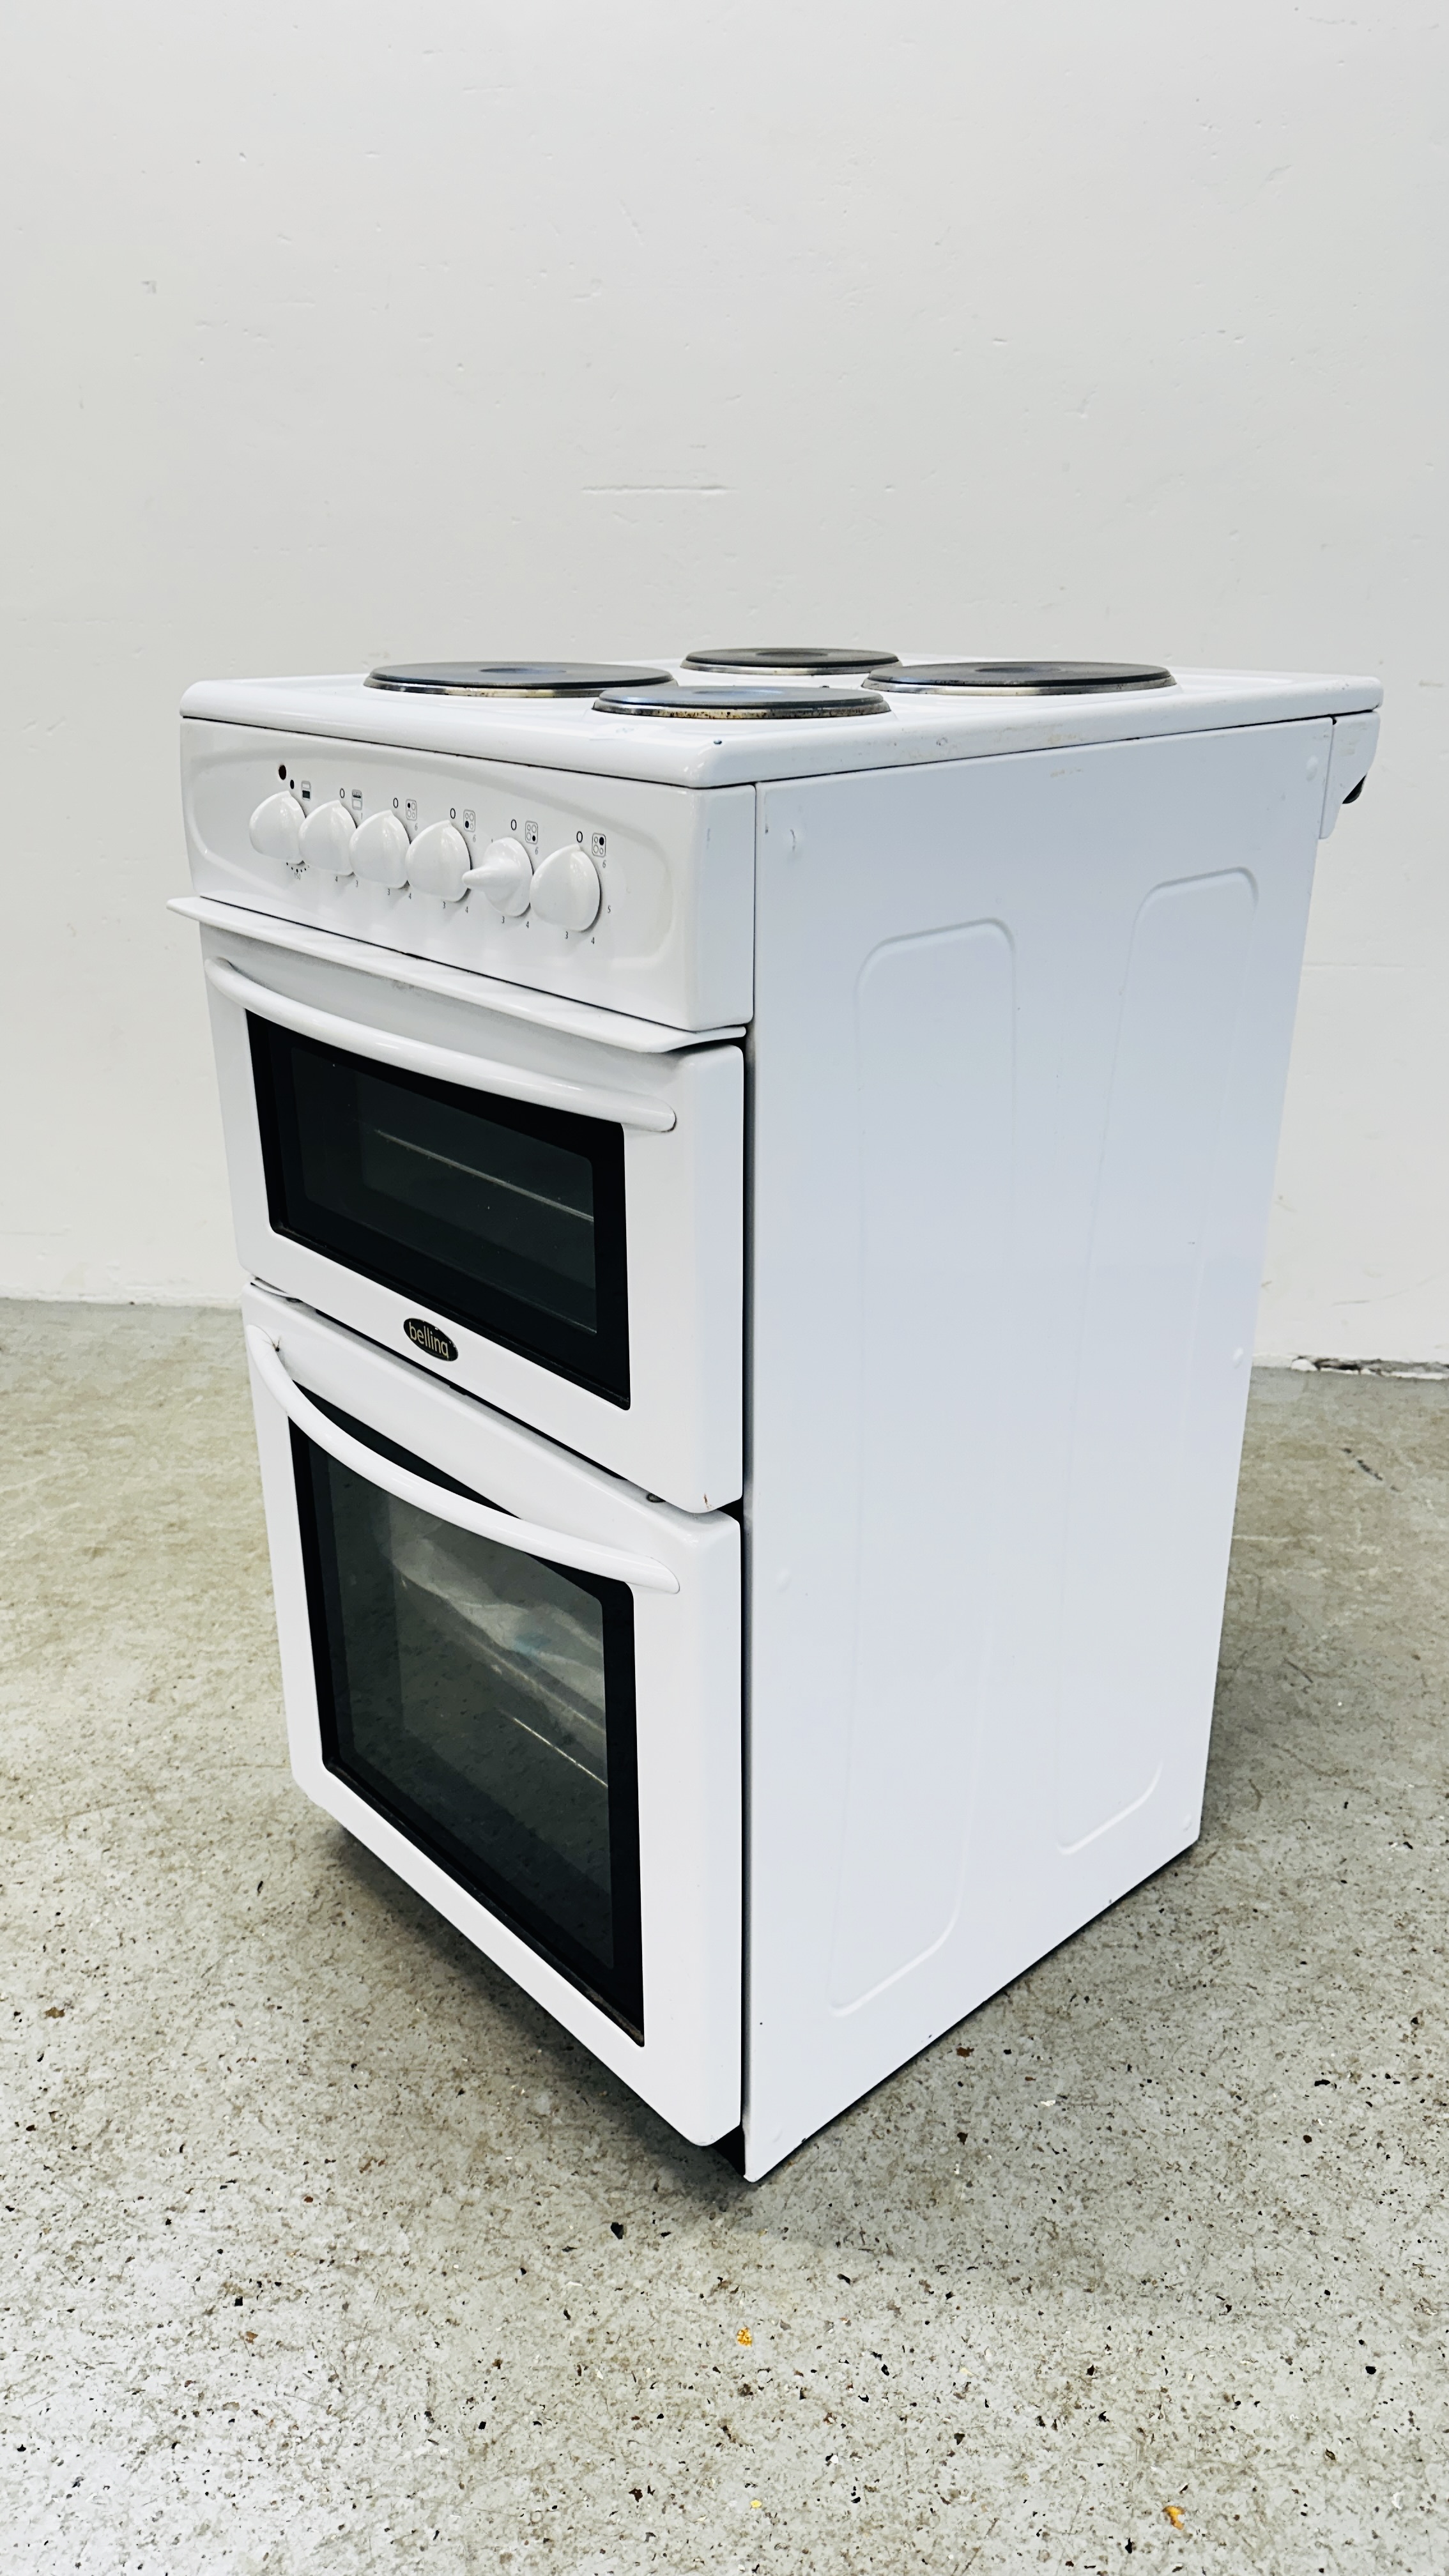 A BELLING ELECTRIC COOKER - SOLD AS SEEN - TRADE ONLY - Image 8 of 8